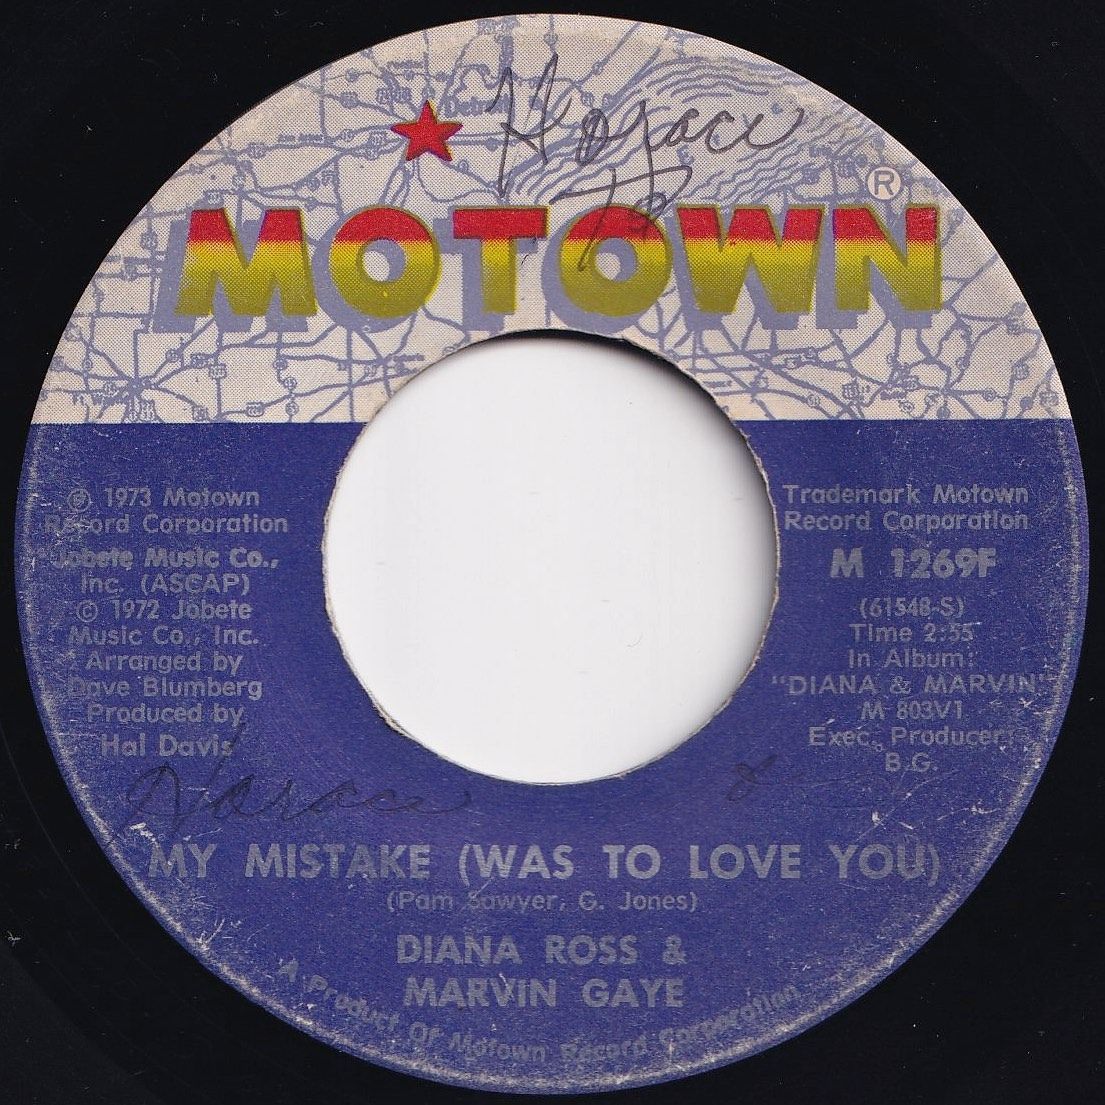 Diana Ross, Marvin Gaye My Mistake (Was To Love You) Include Me In Your  Life Motown US M 1269F 203599 SOUL ソウル レコード 7インチ 45 Solidity Records  メルカリ